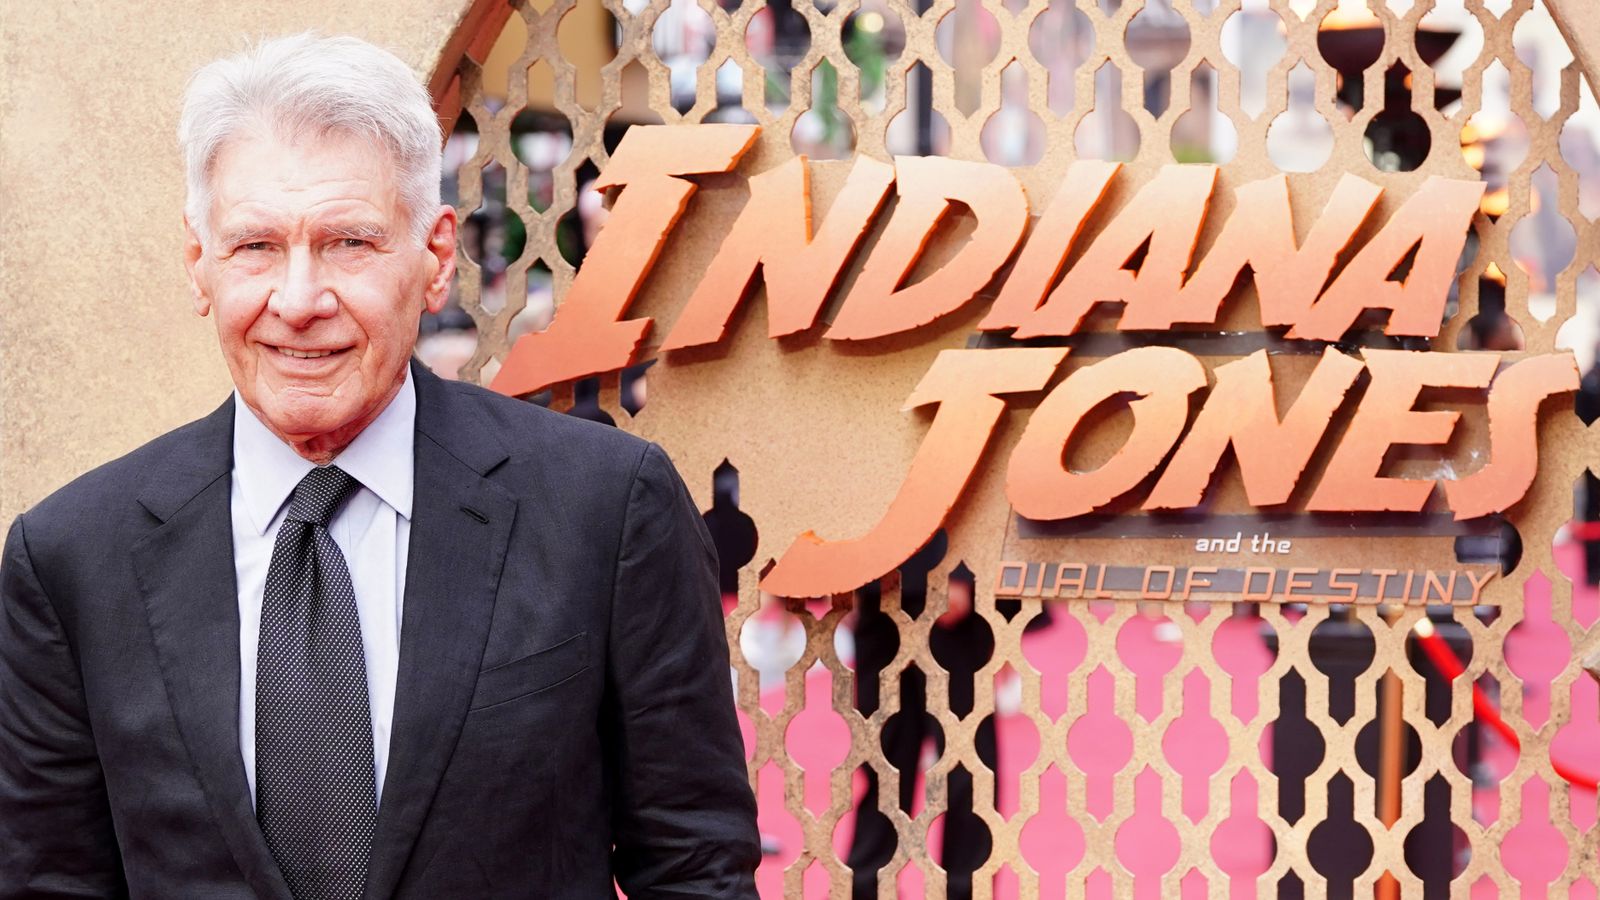 Harrison Ford Takes One Last Adventure as Indiana Jones